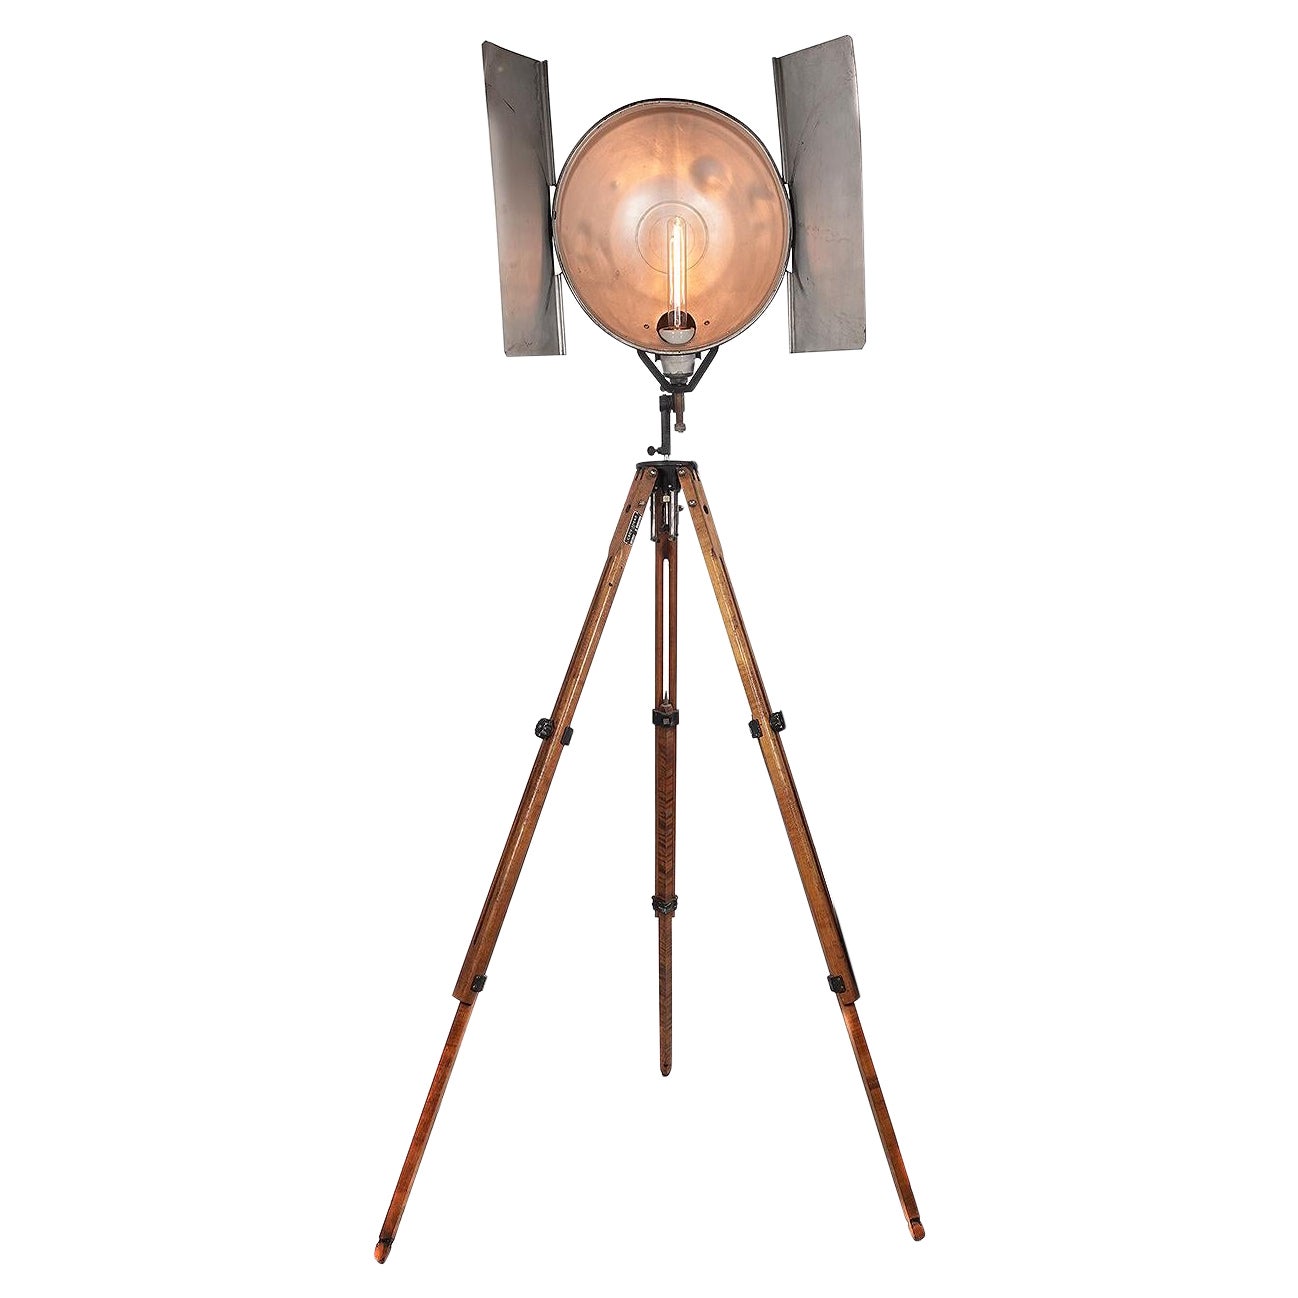 Early Photographers Light on Wooden Tripod.